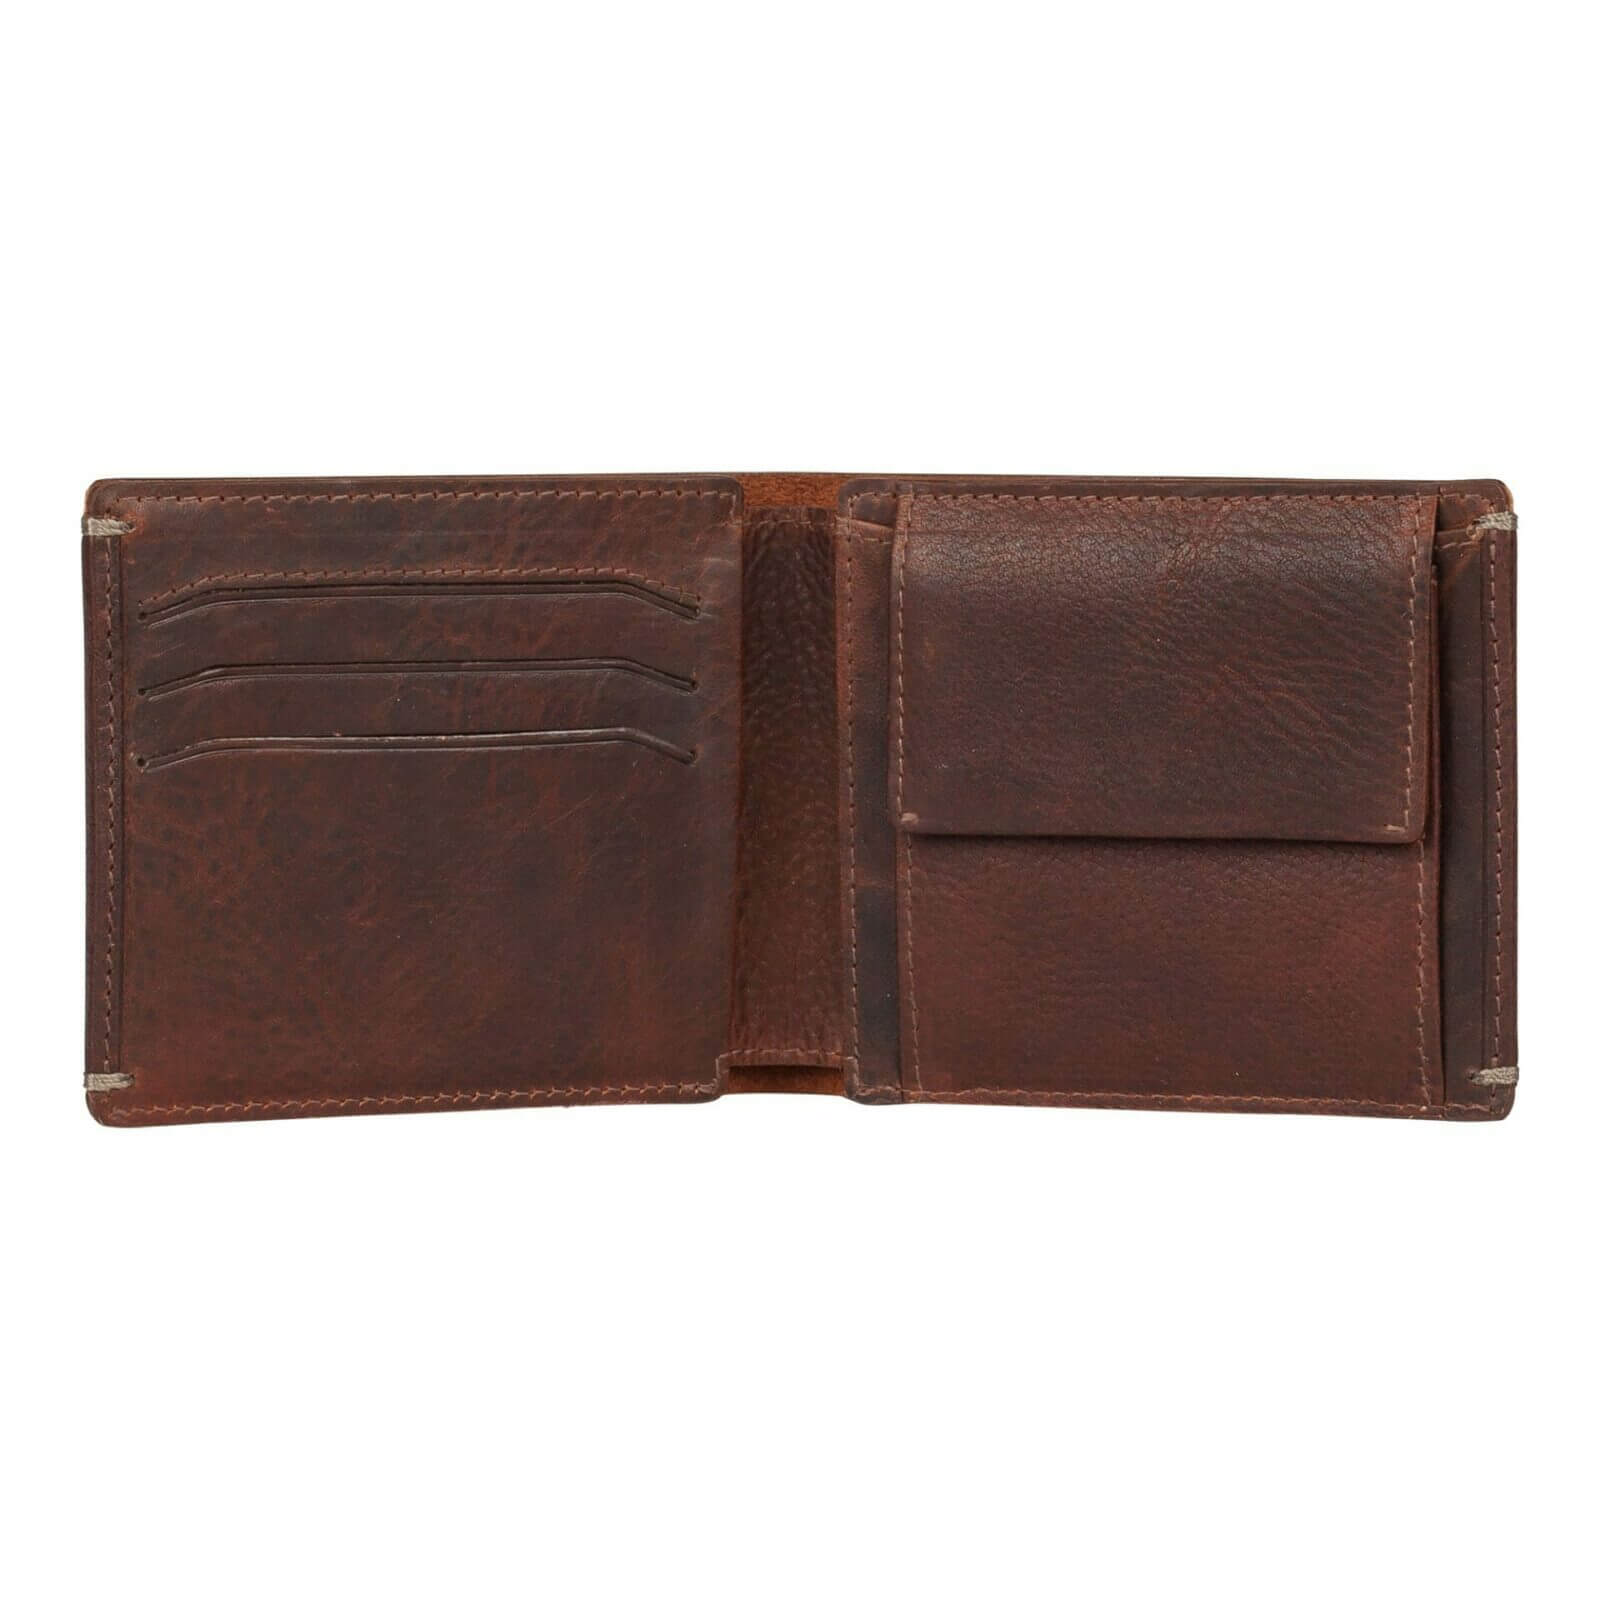 BURKELY FUNDAMENTALS ANTIQUE AVERY BILLFOLD LOW COIN